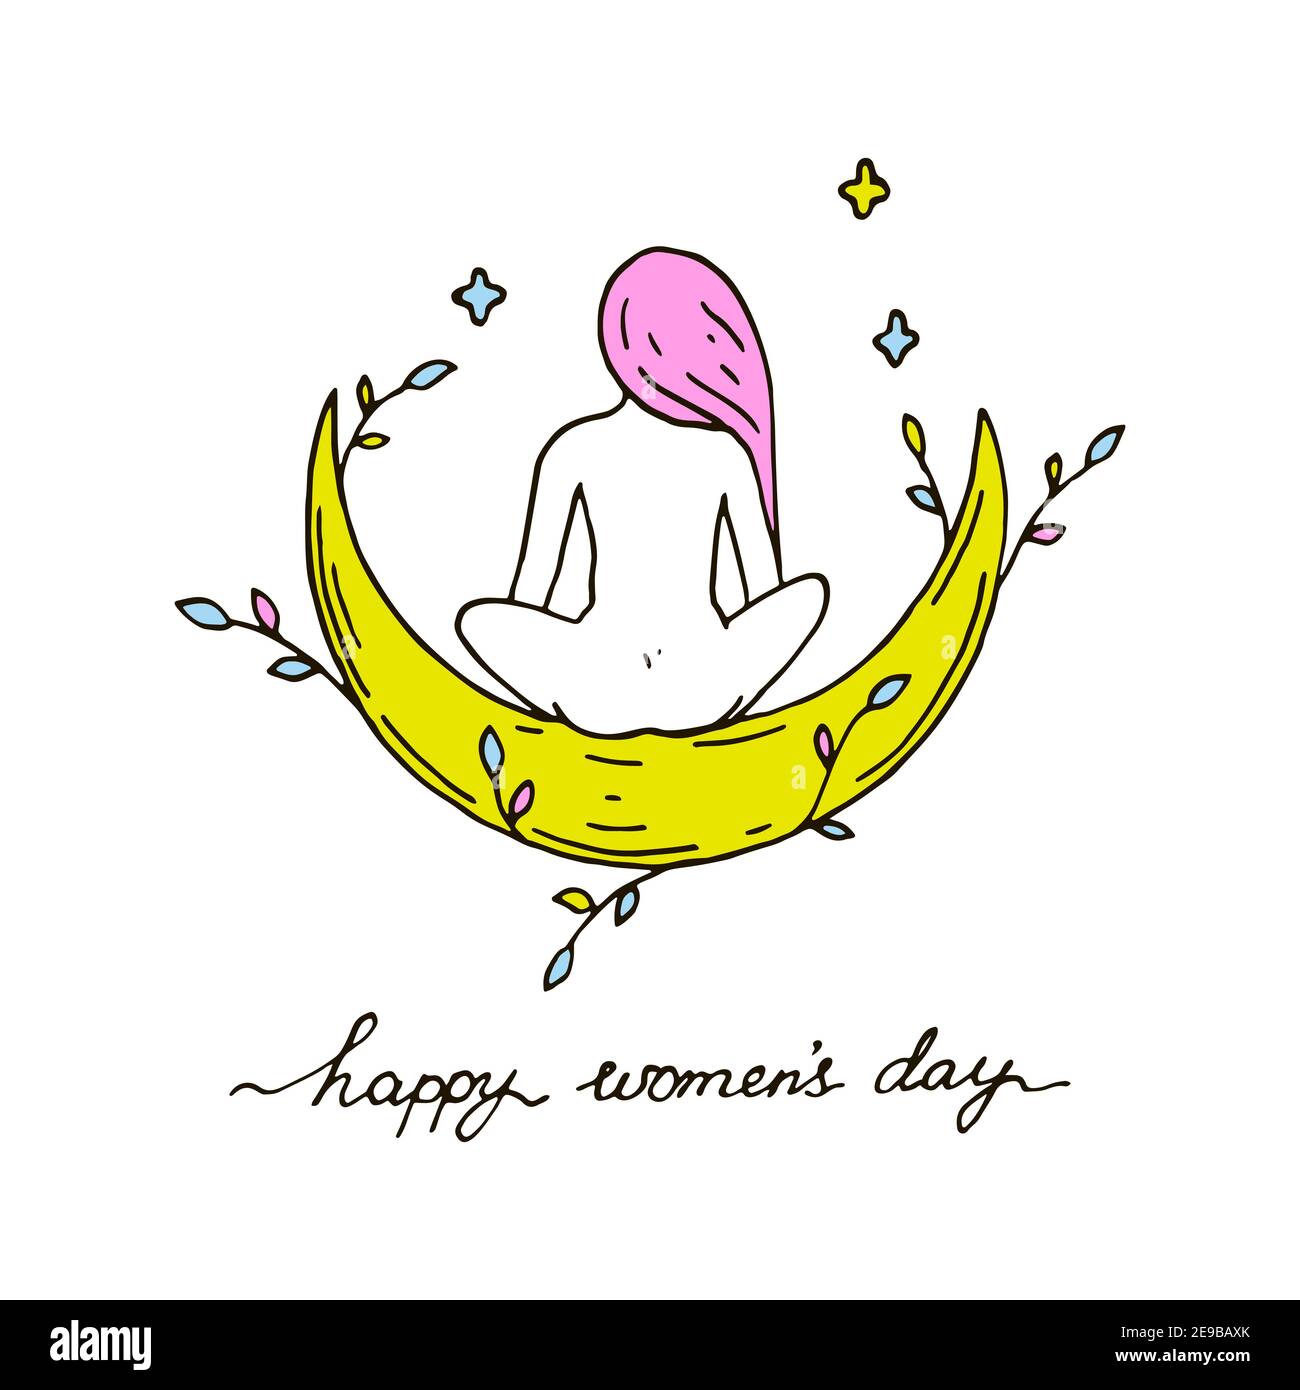 Women’s Day greeting card. Woman sitting on a half moon. Hand drawn vector illustration Stock Vector